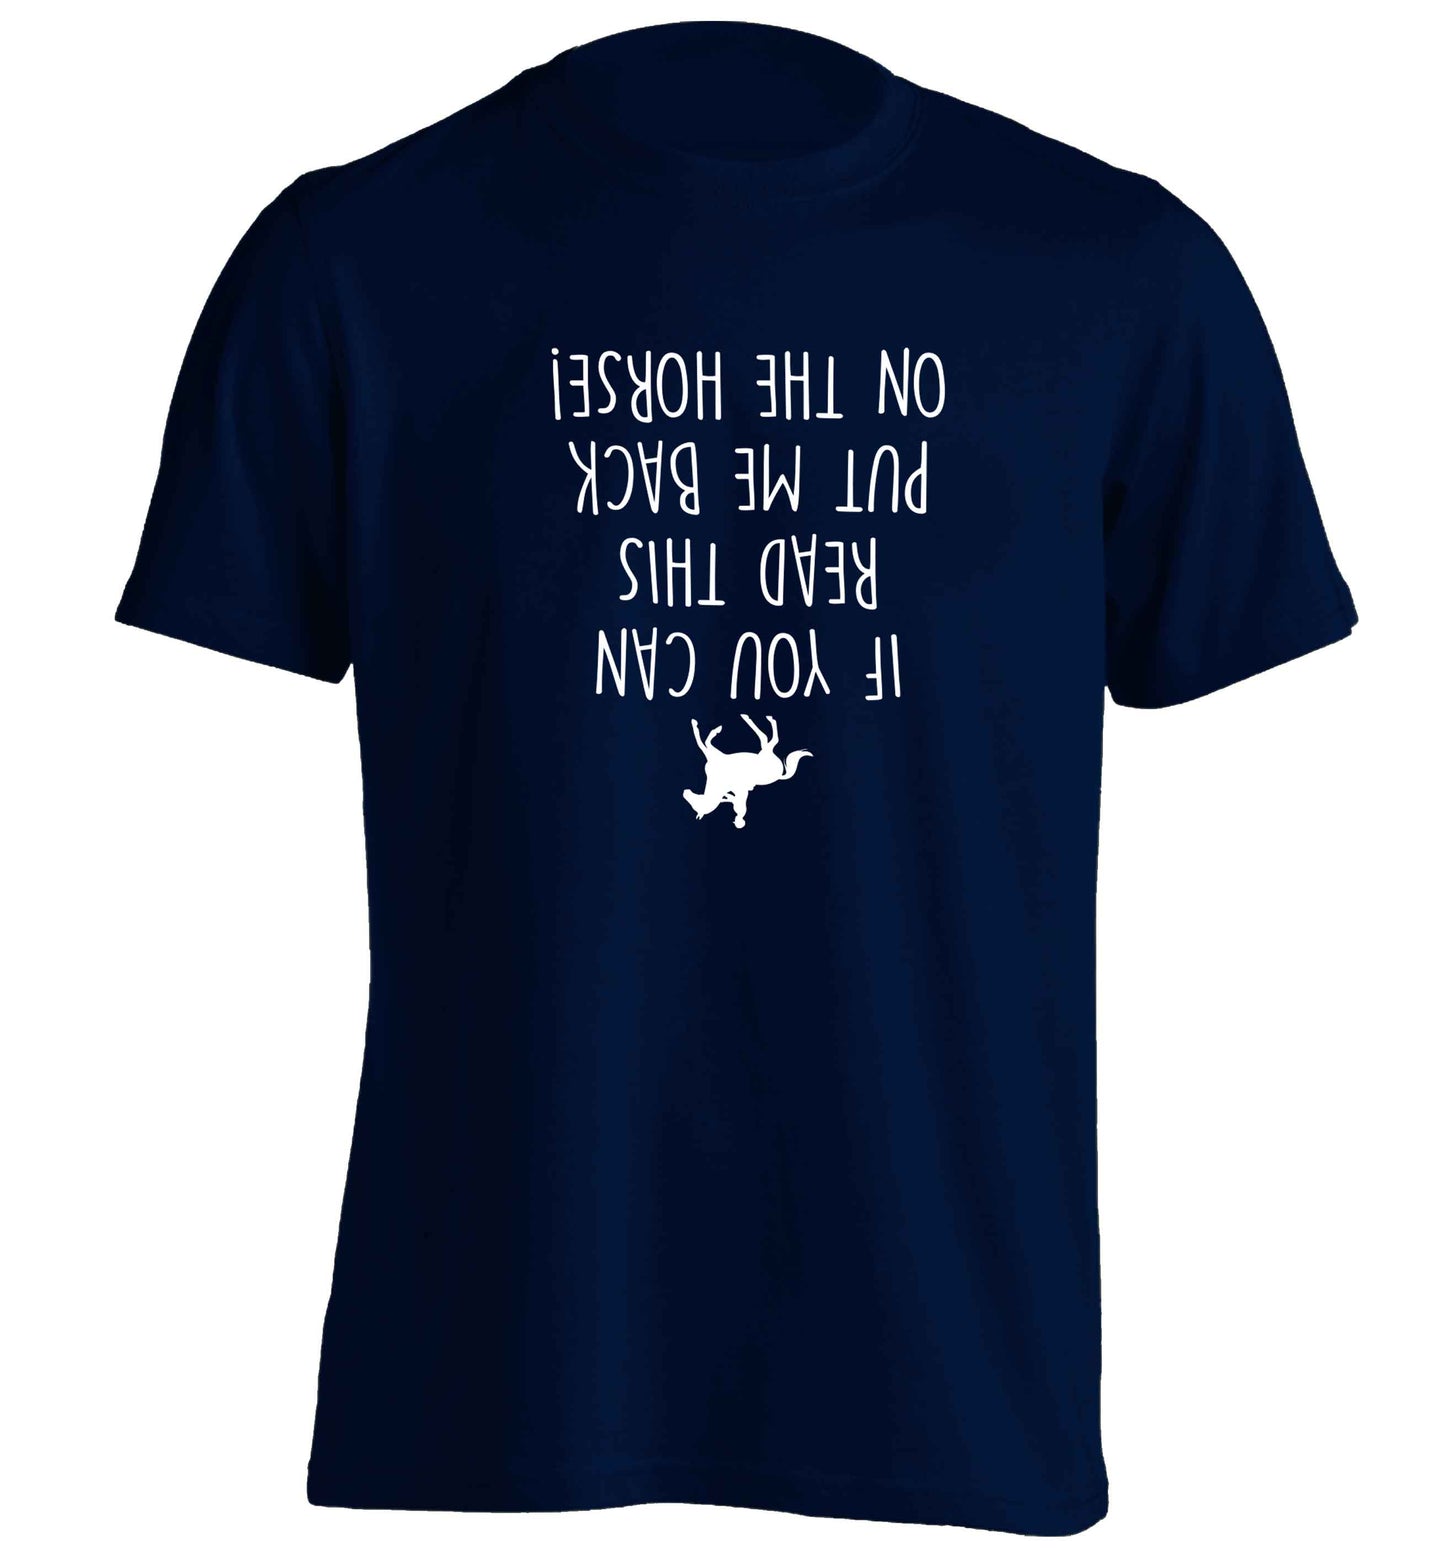 If you can read this put me back on the horse adults unisex navy Tshirt 2XL